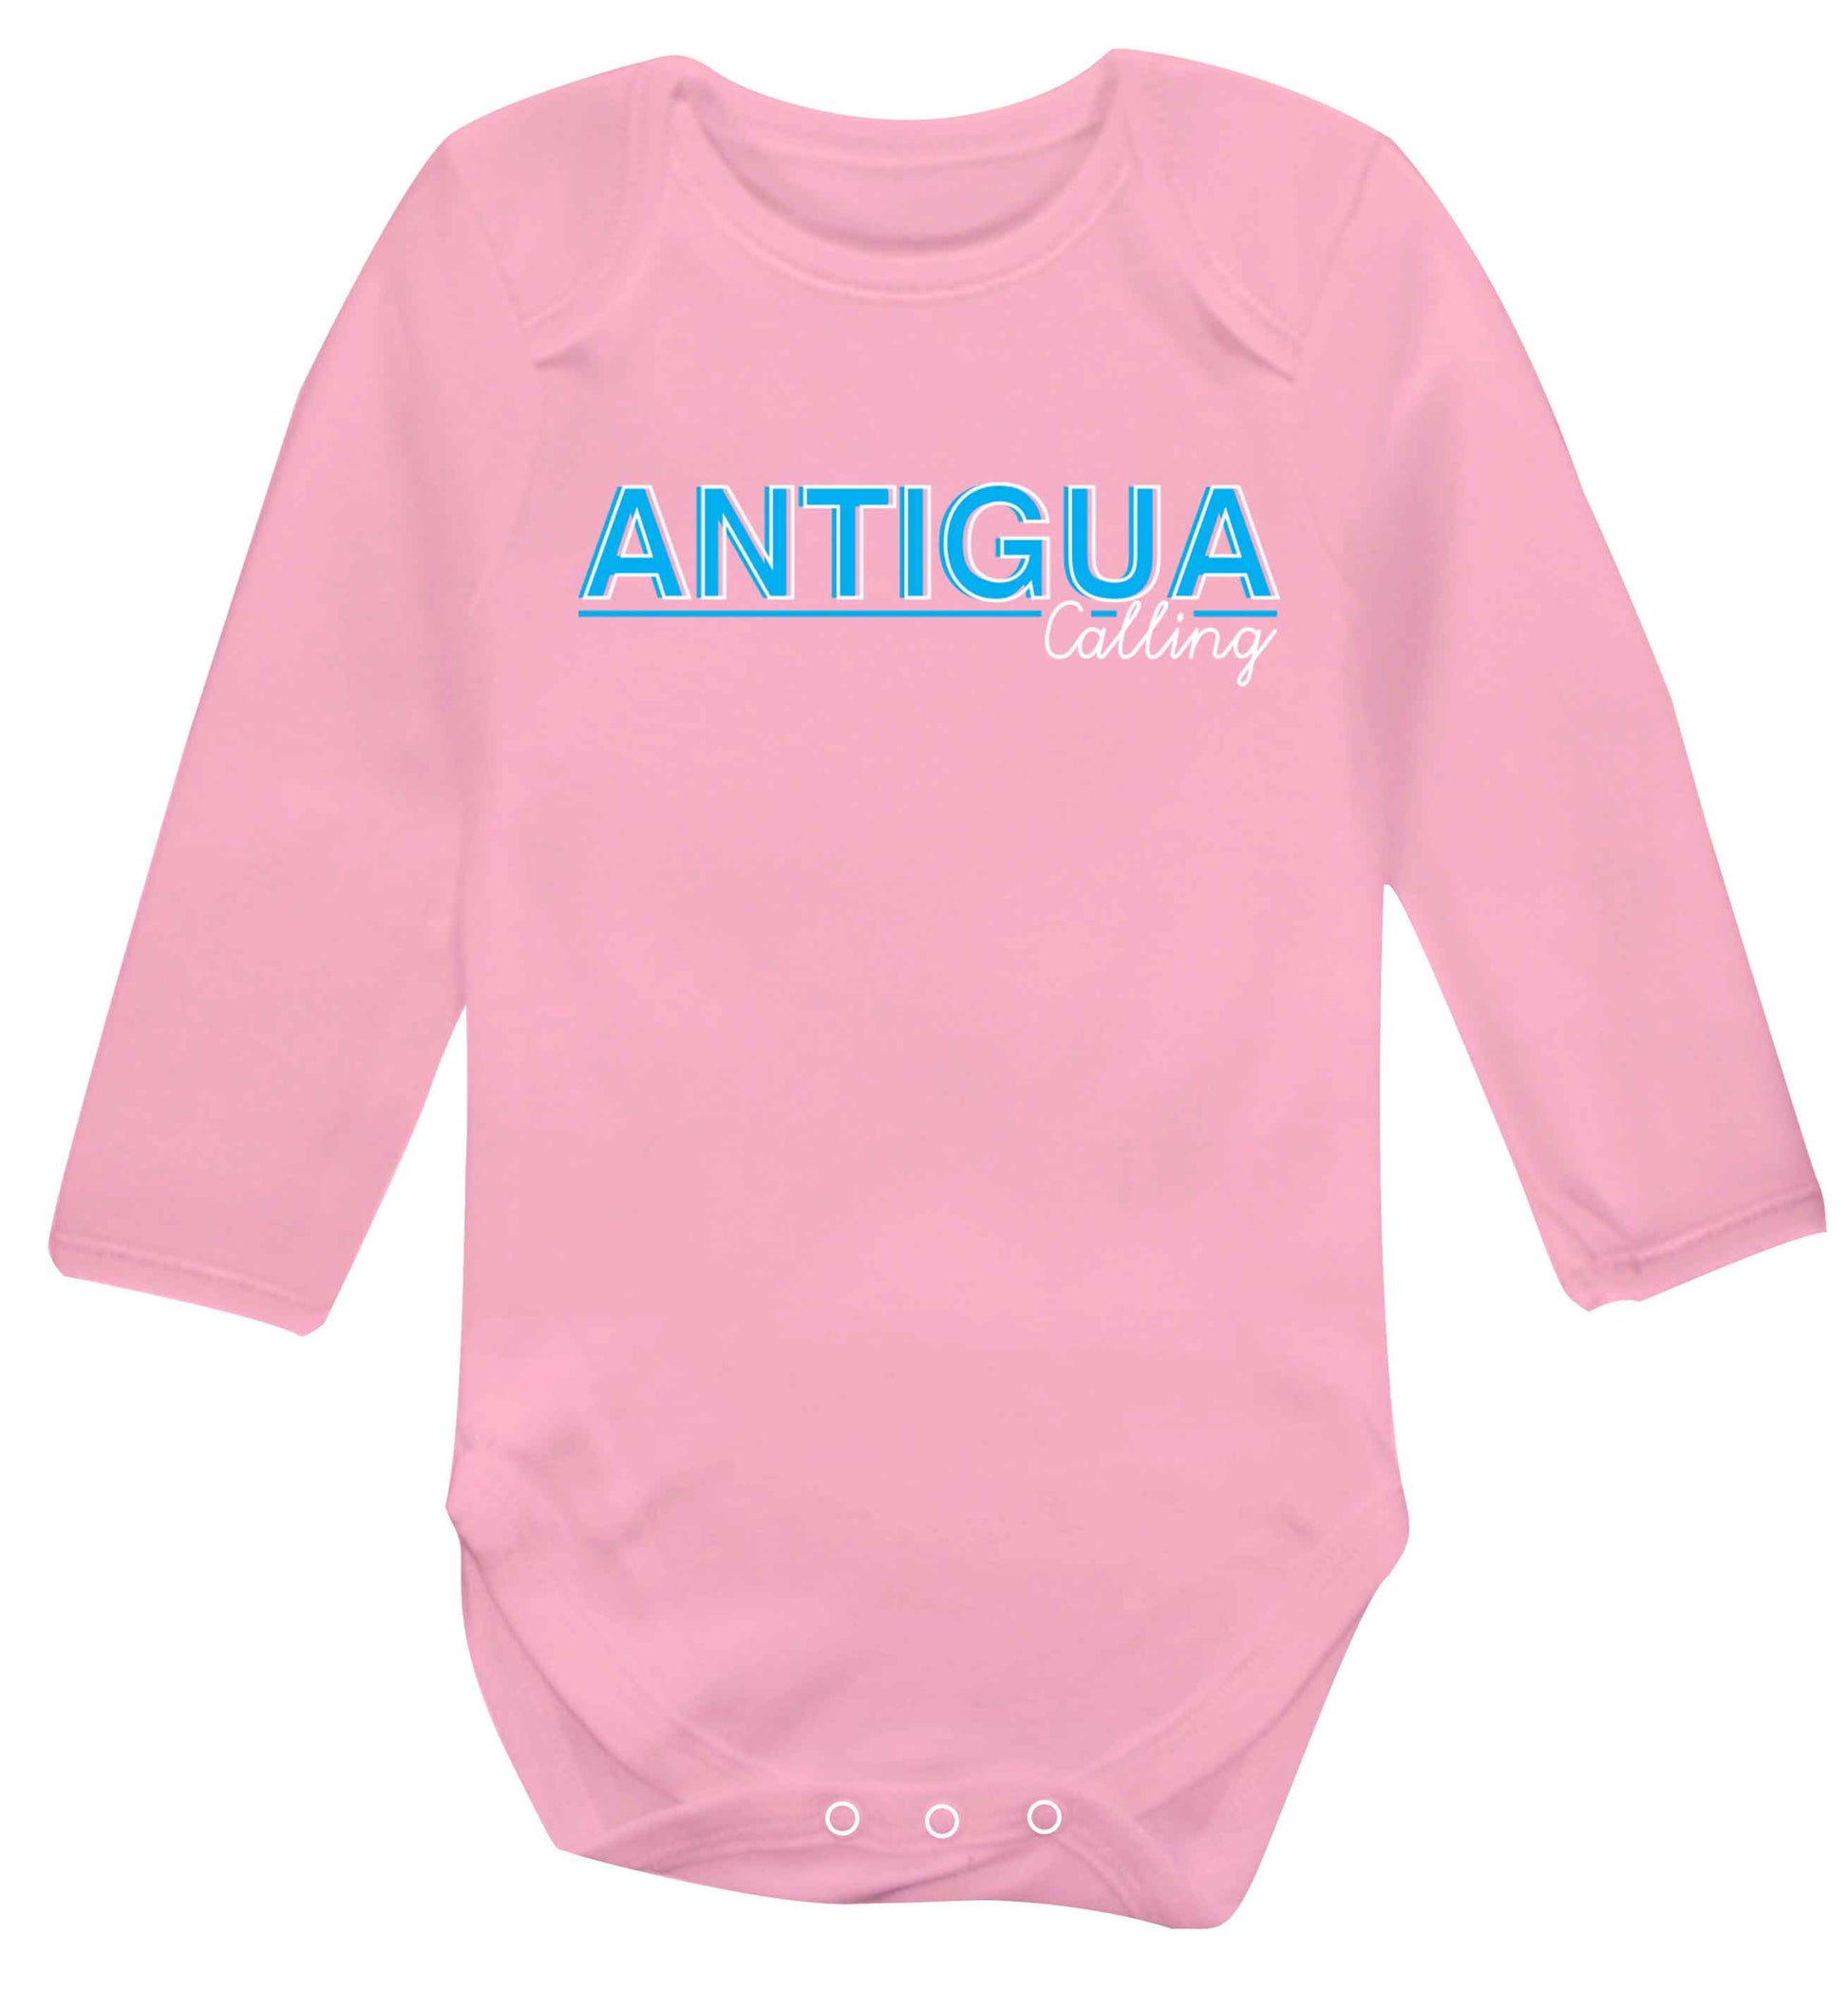 Antigua calling Baby Vest long sleeved pale pink 6-12 months